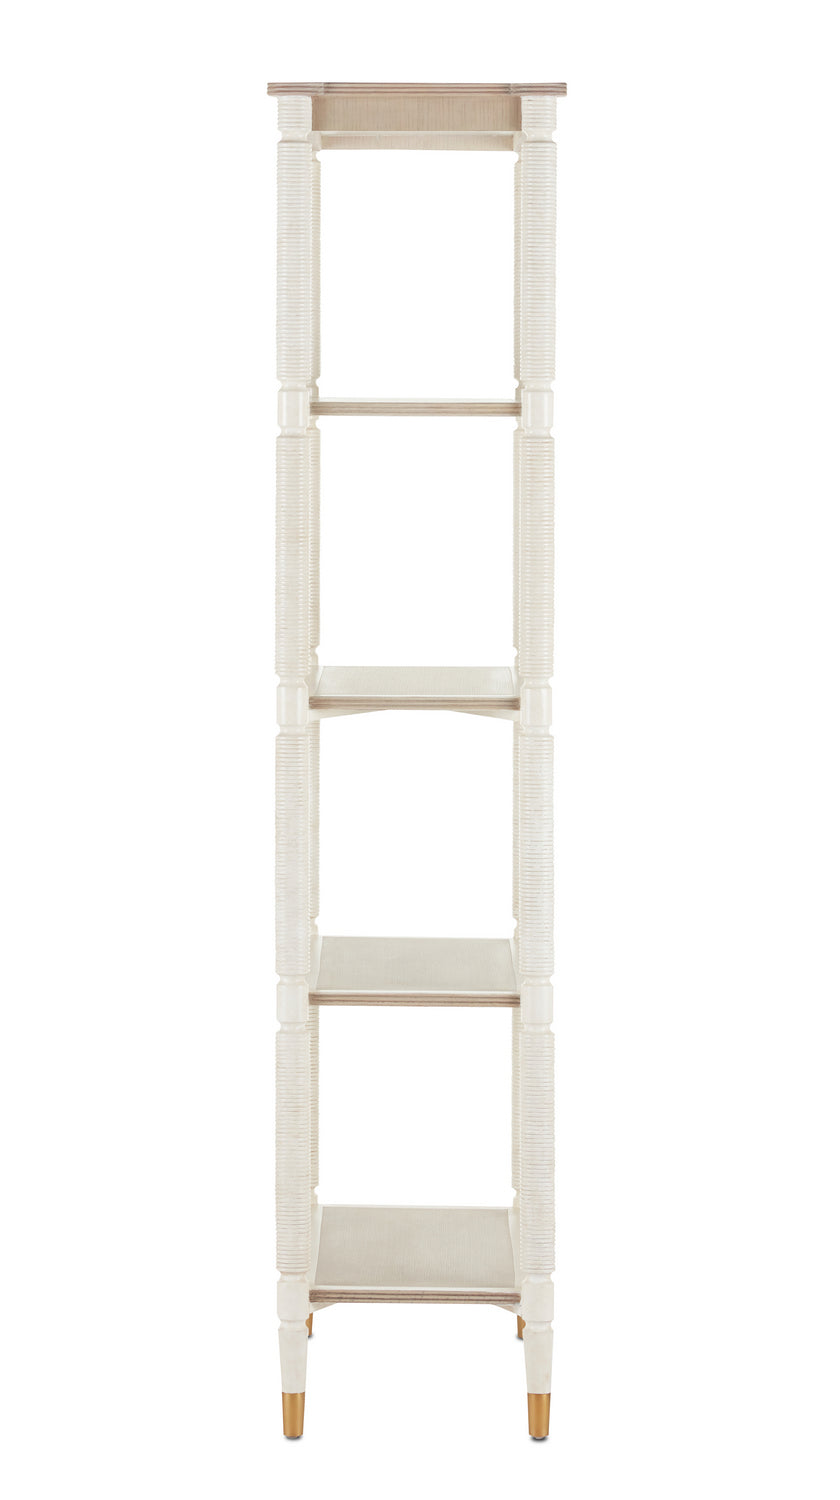 Etagere from the Winterthur collection in Off White/Fog/Brass finish